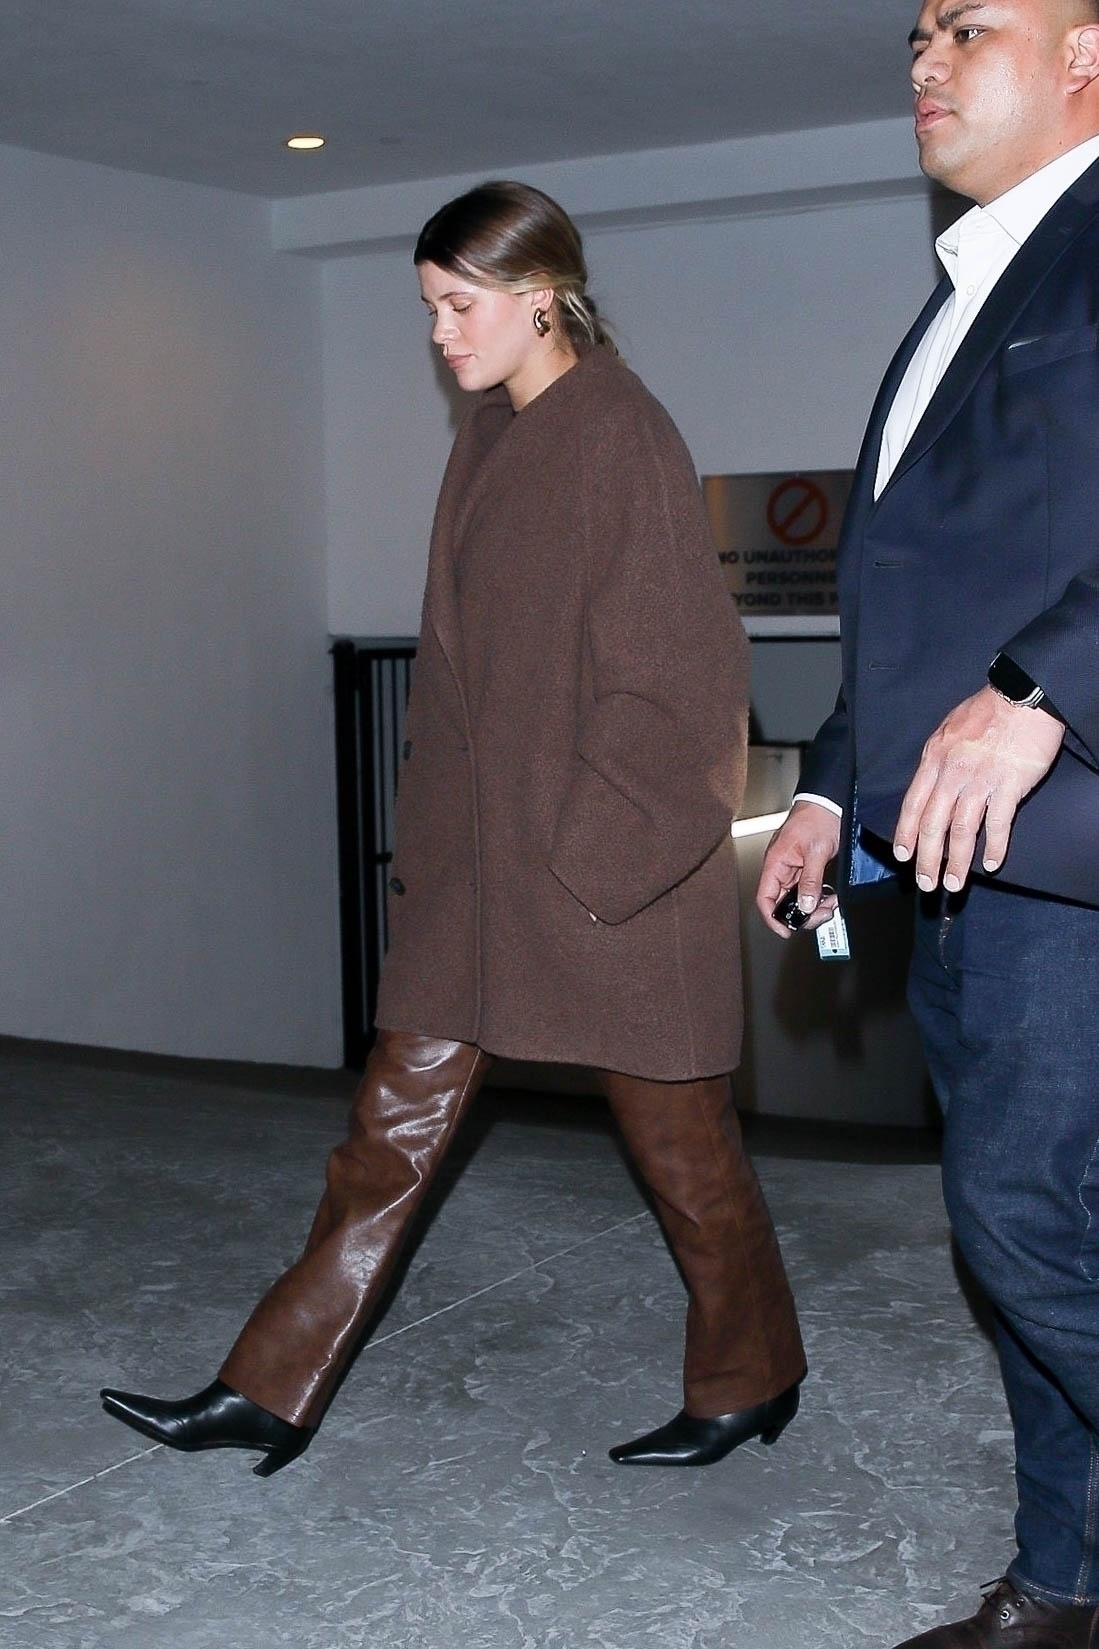 She paired the jacket with brown leather pants and black, short-heeled boots